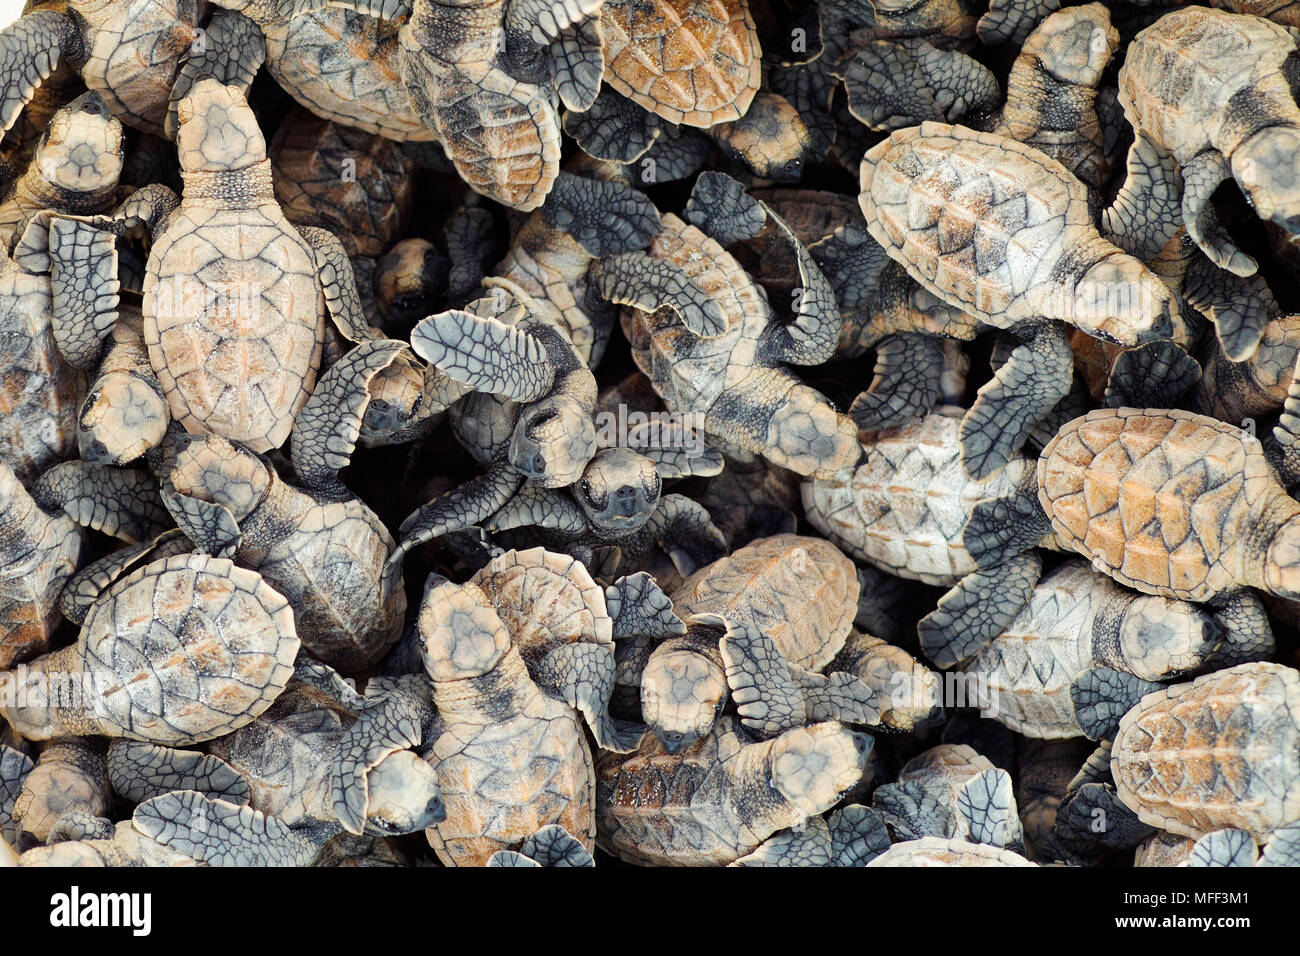 Mass of Hawksbill turtle hatchlings. (Eretmochelys imbricata). Endangered species.  Cousine Island. Seychelles. Dist. Tropical and subtropical oceans Stock Photo